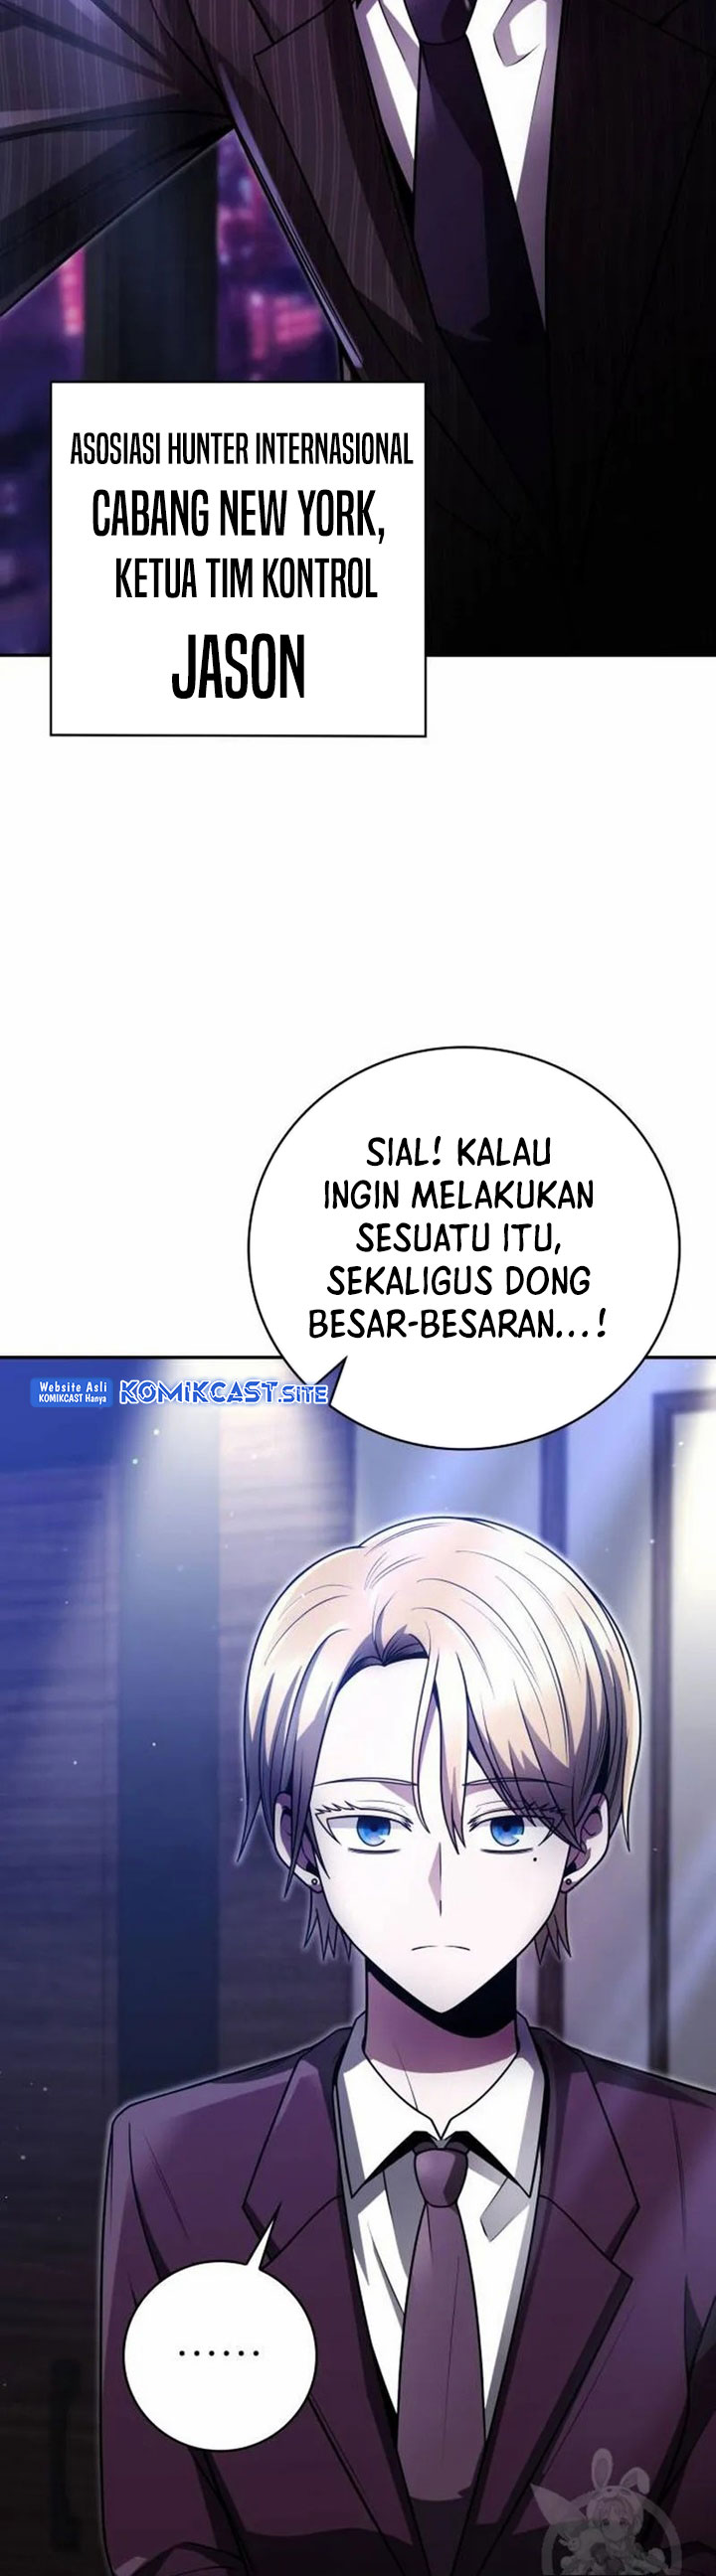 Dilarang COPAS - situs resmi www.mangacanblog.com - Komik clever cleaning life of the returned genius hunter 032 - chapter 32 33 Indonesia clever cleaning life of the returned genius hunter 032 - chapter 32 Terbaru 12|Baca Manga Komik Indonesia|Mangacan